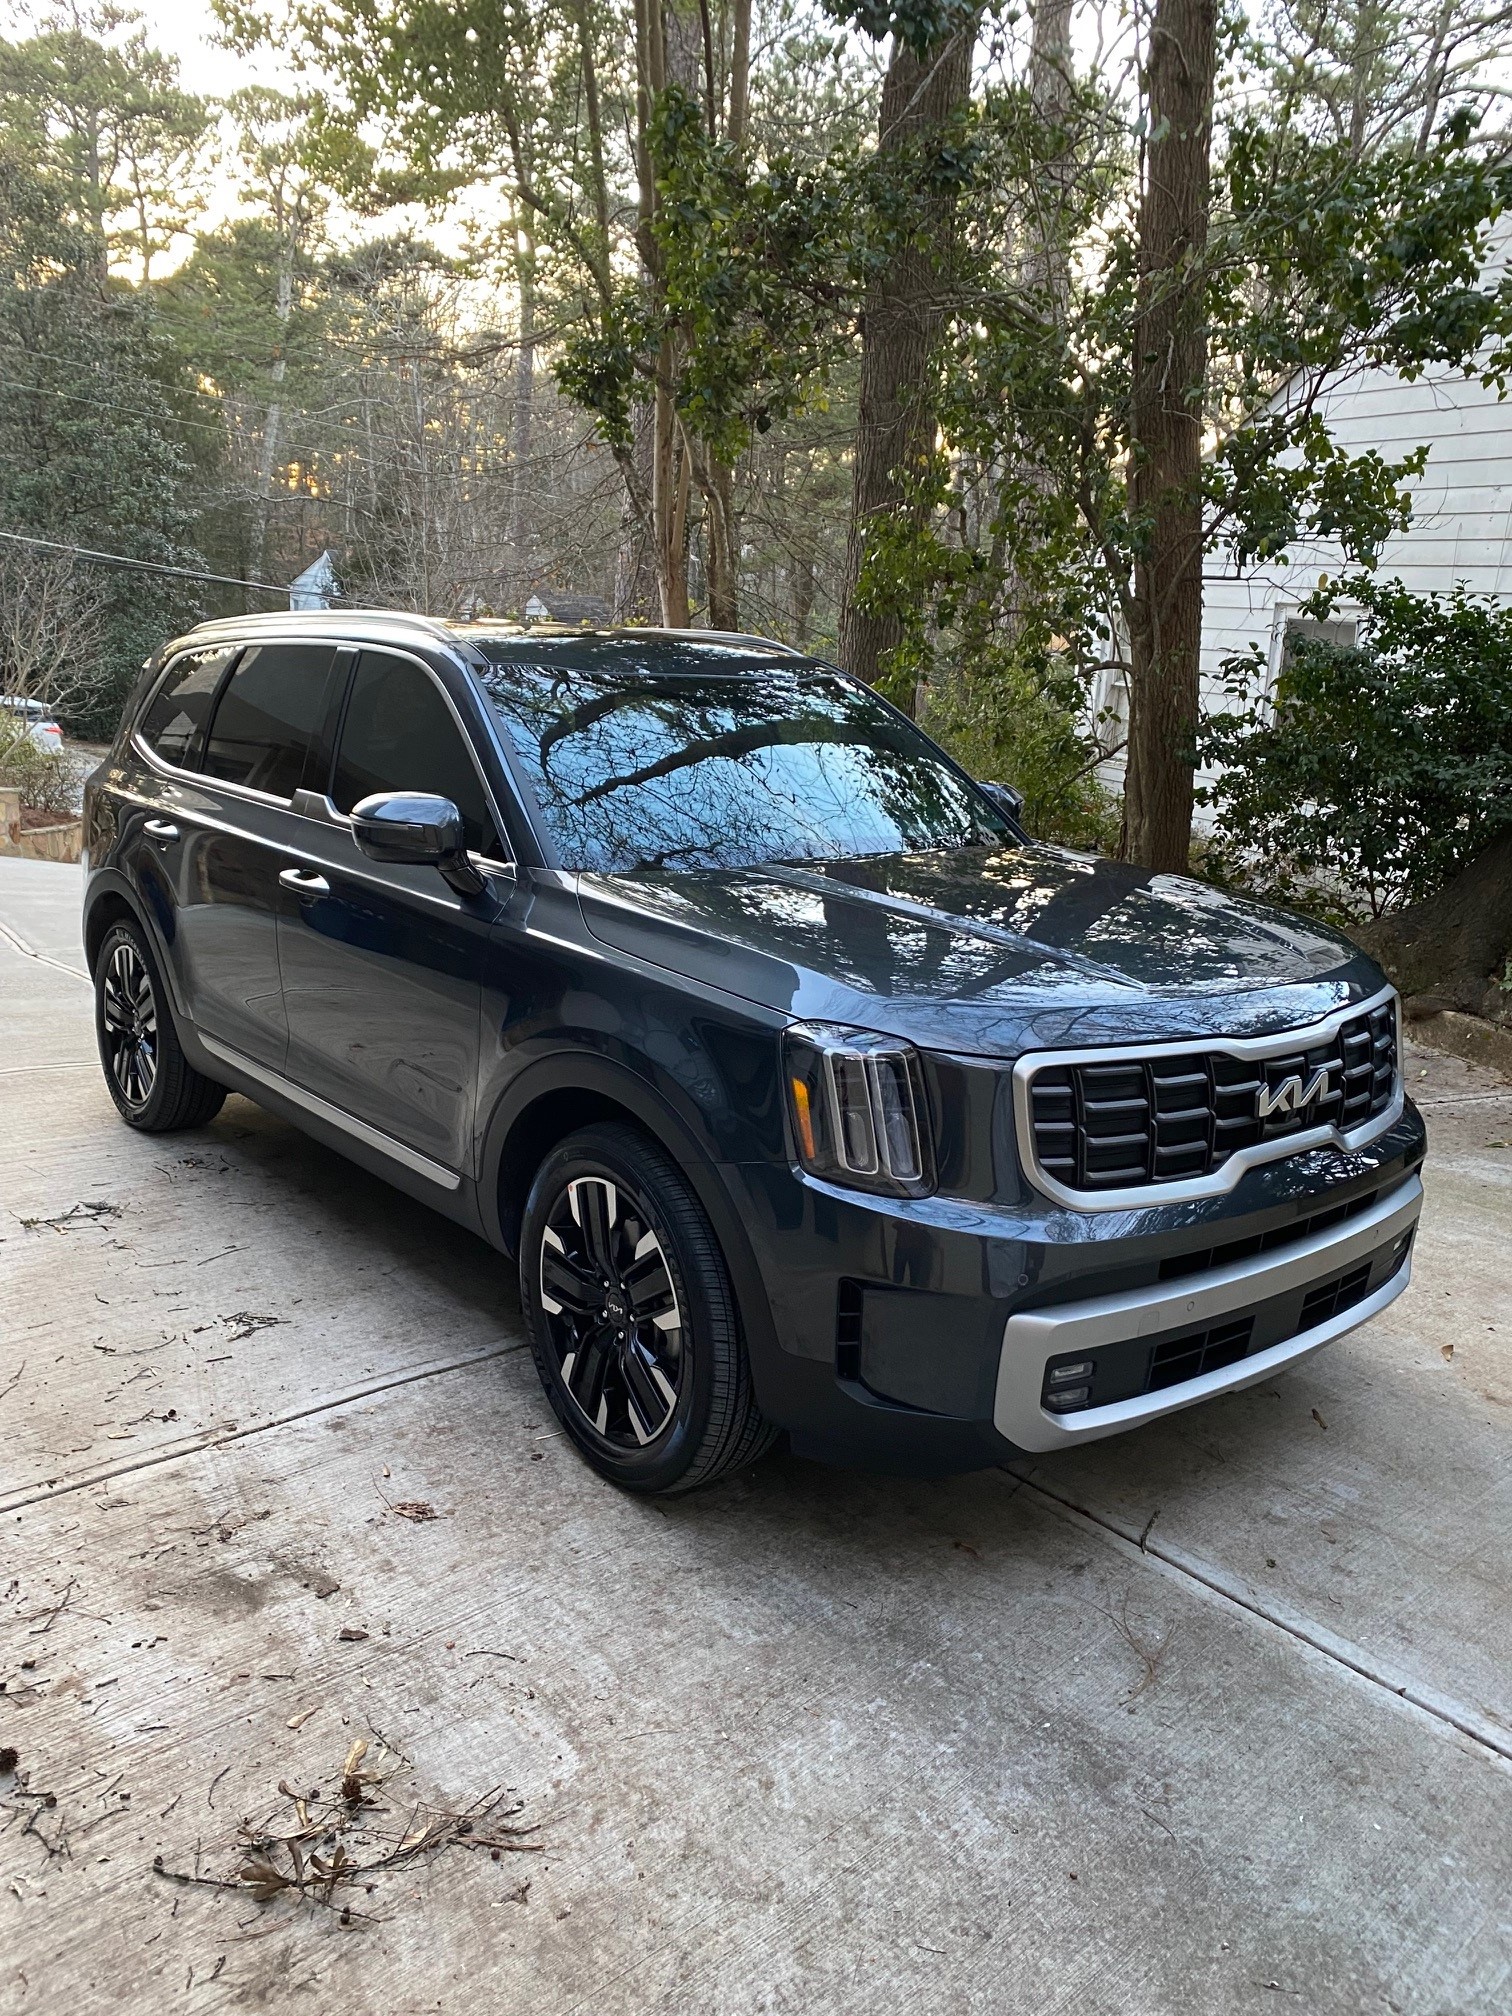 Used 2023 Kia Telluride for Sale (Test Drive at Home) - Kelley Blue Book